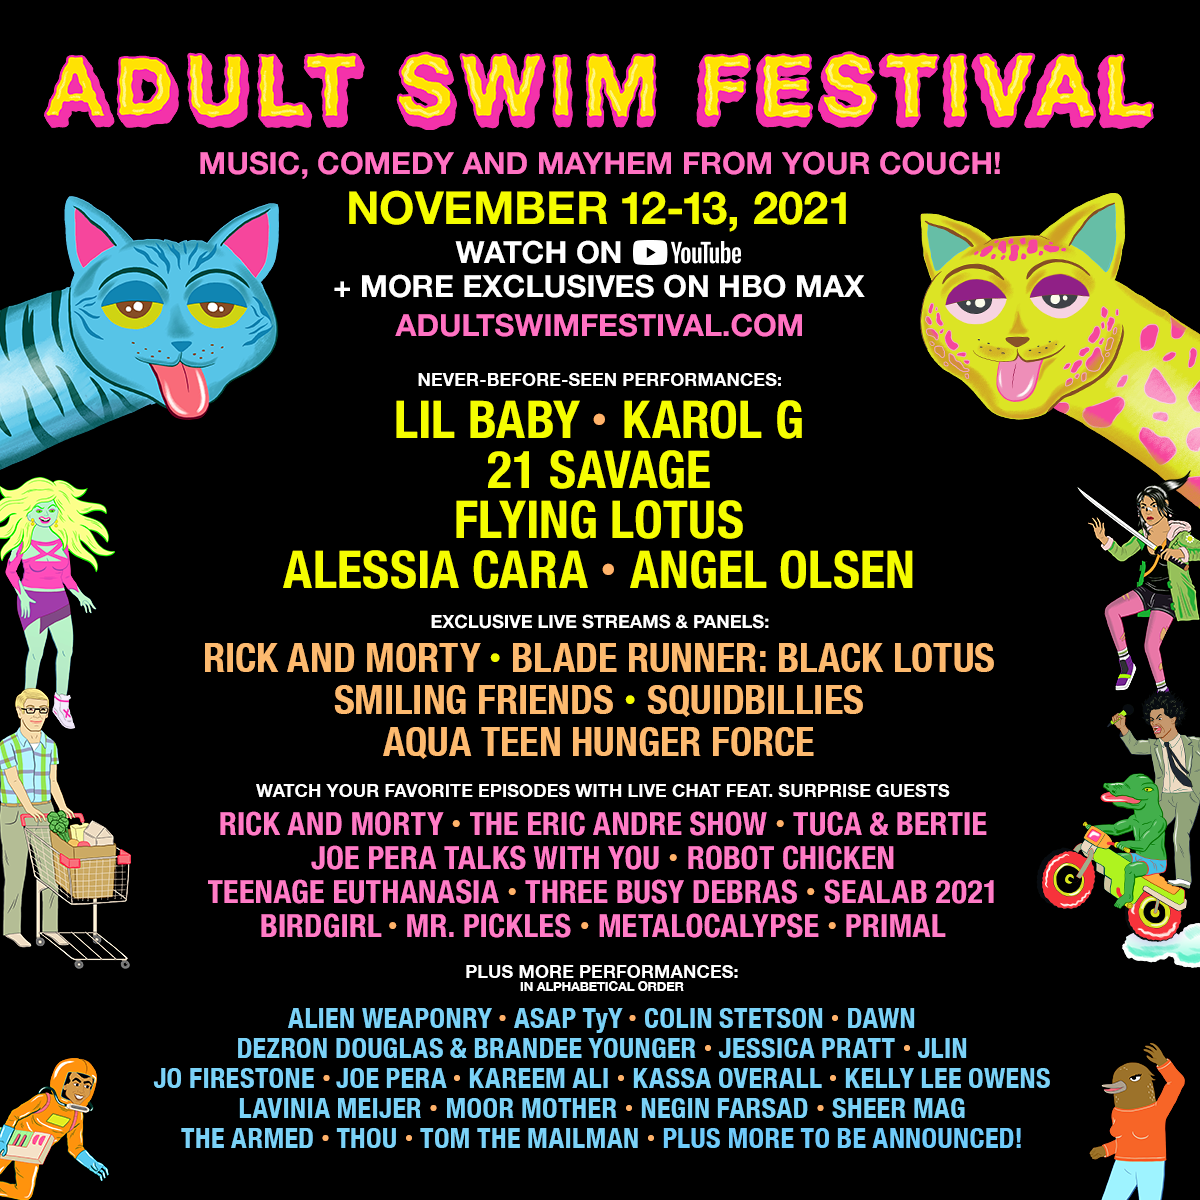 Virtual Adult Swim Festival Returns This November AFA Animation For Adults Animation News, Reviews, Articles, Podcasts and More